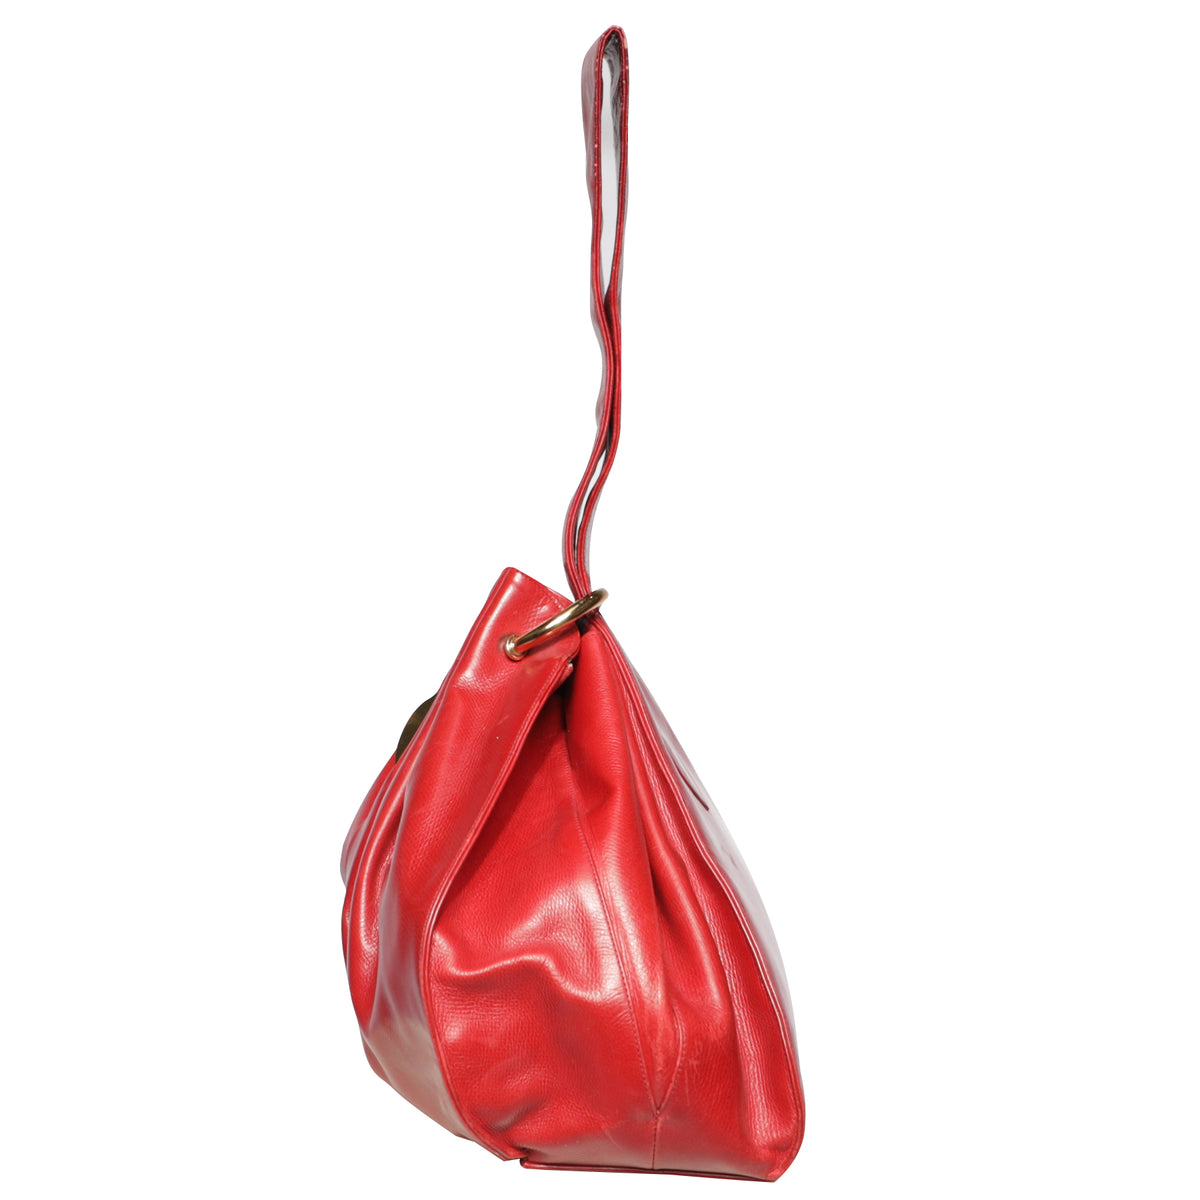 Vintage 1960s Koret Red Leather Trapezoid Pouch Bag